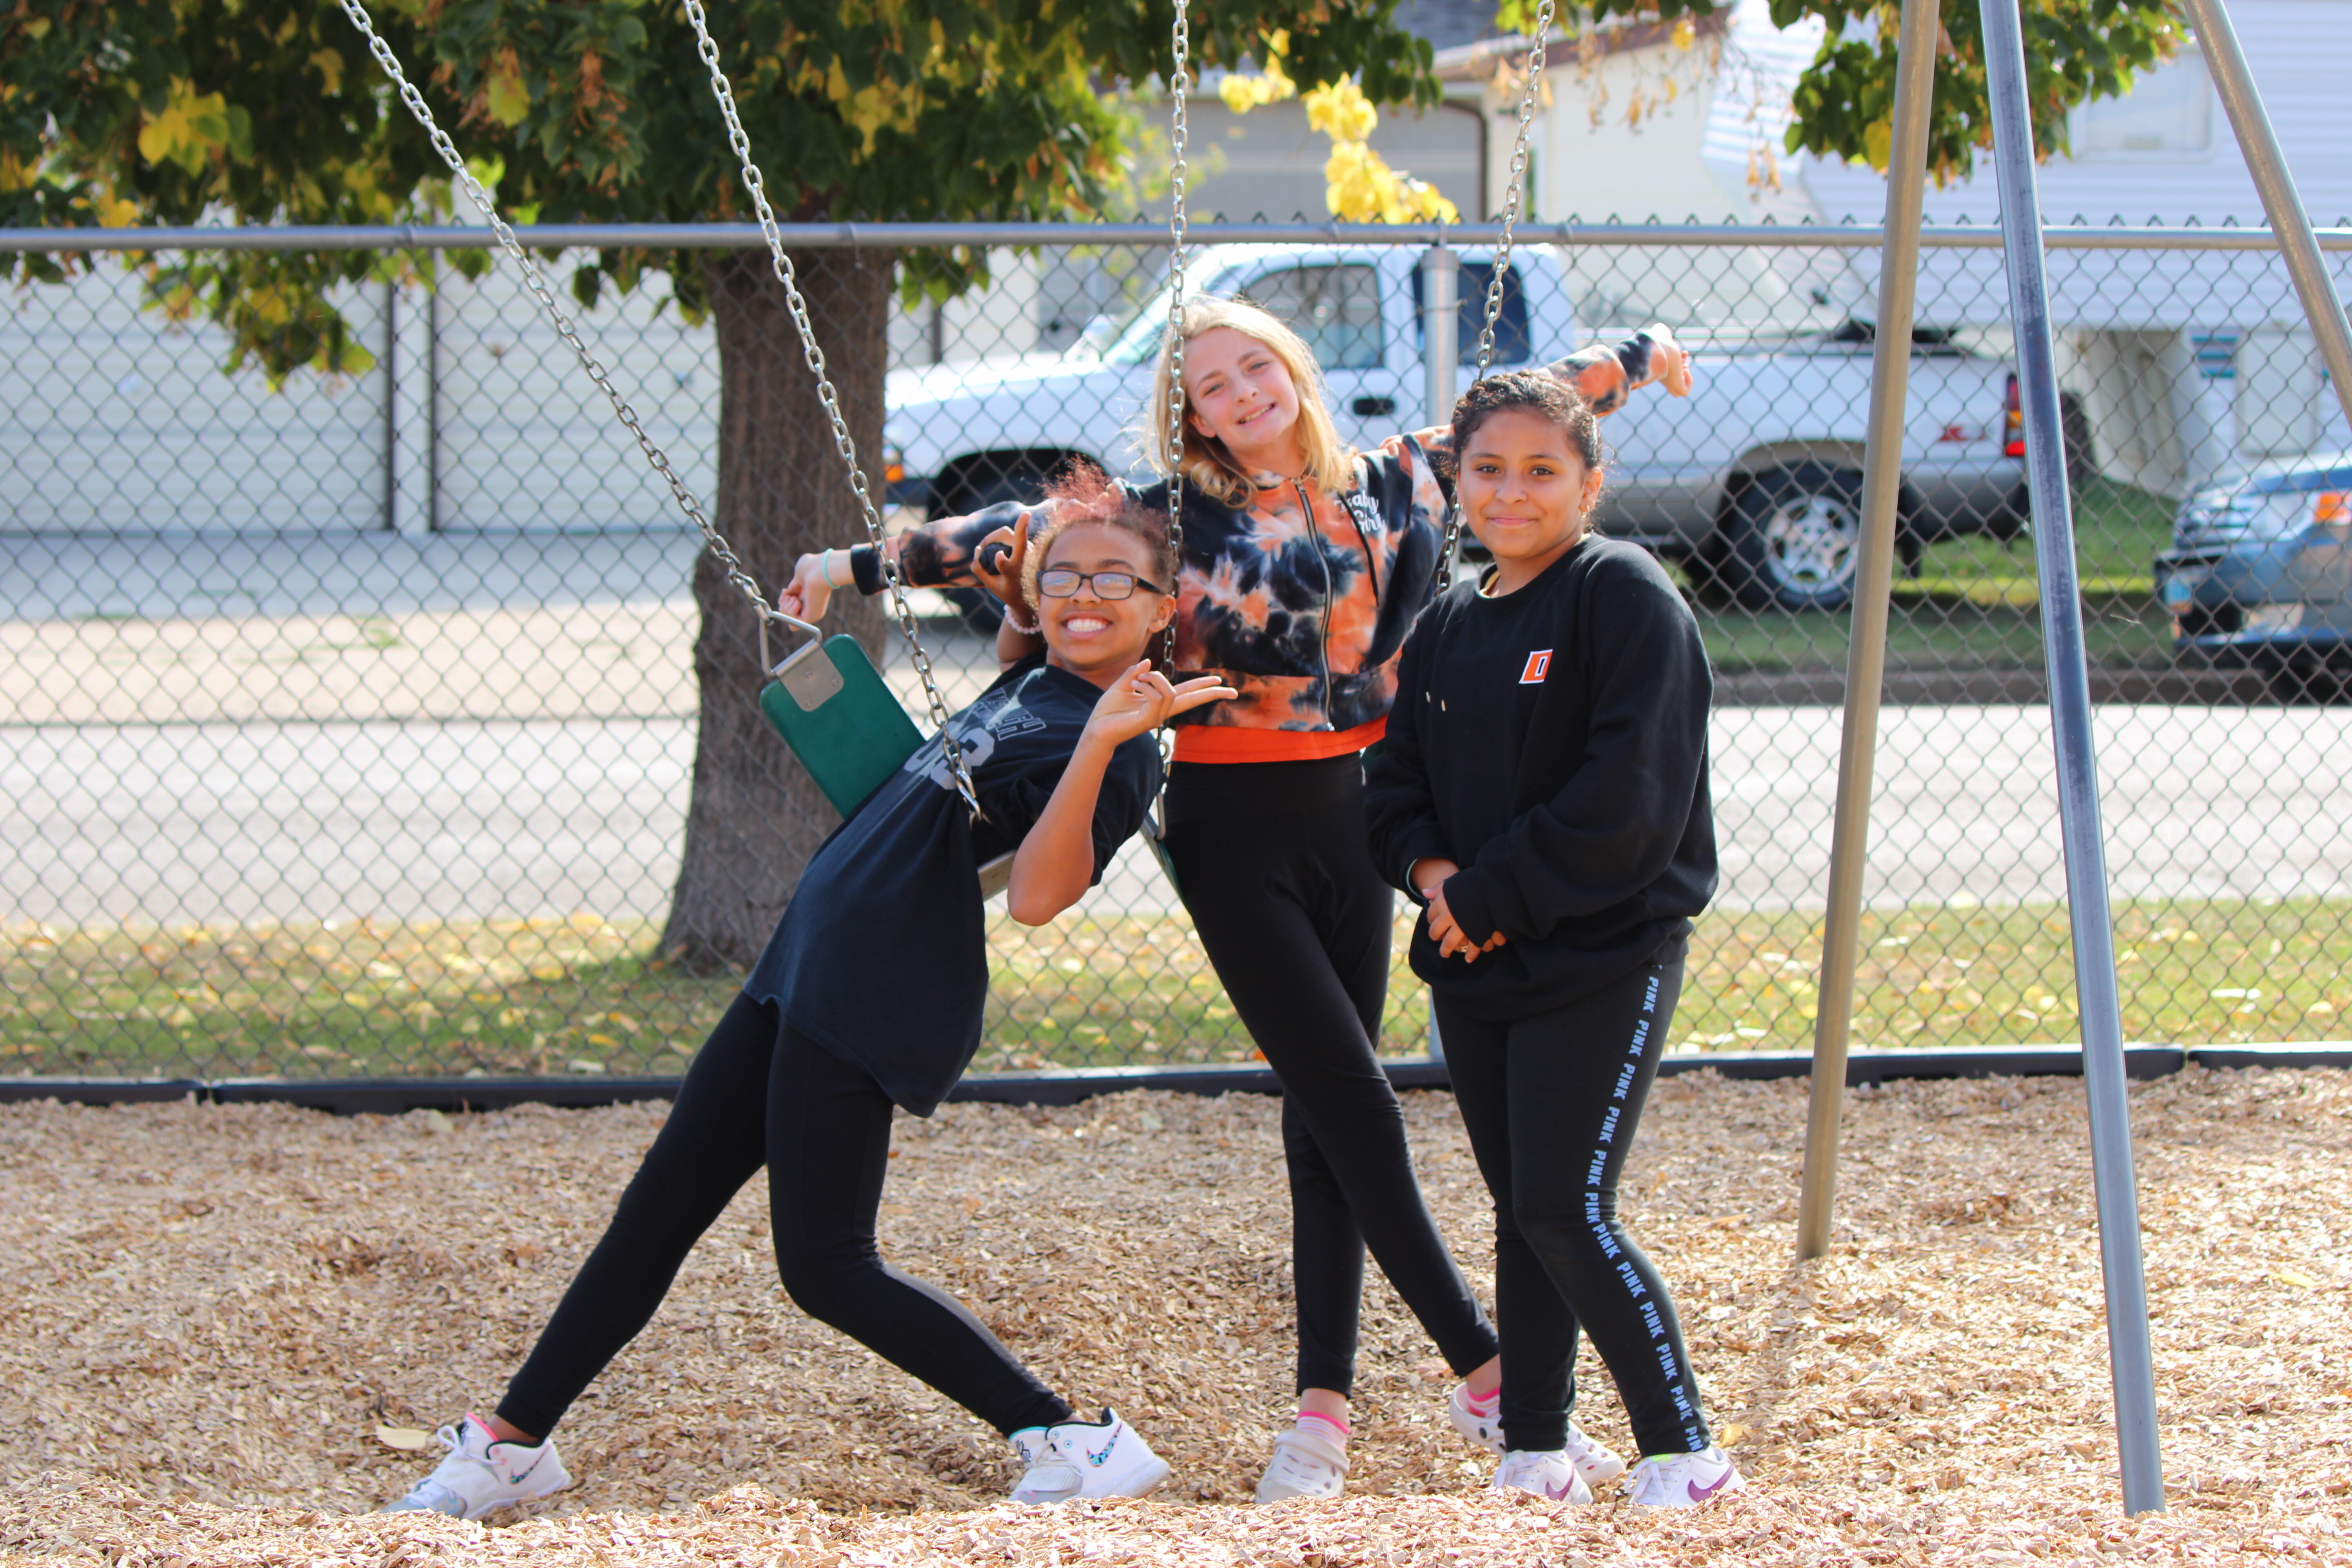 Students in the playground